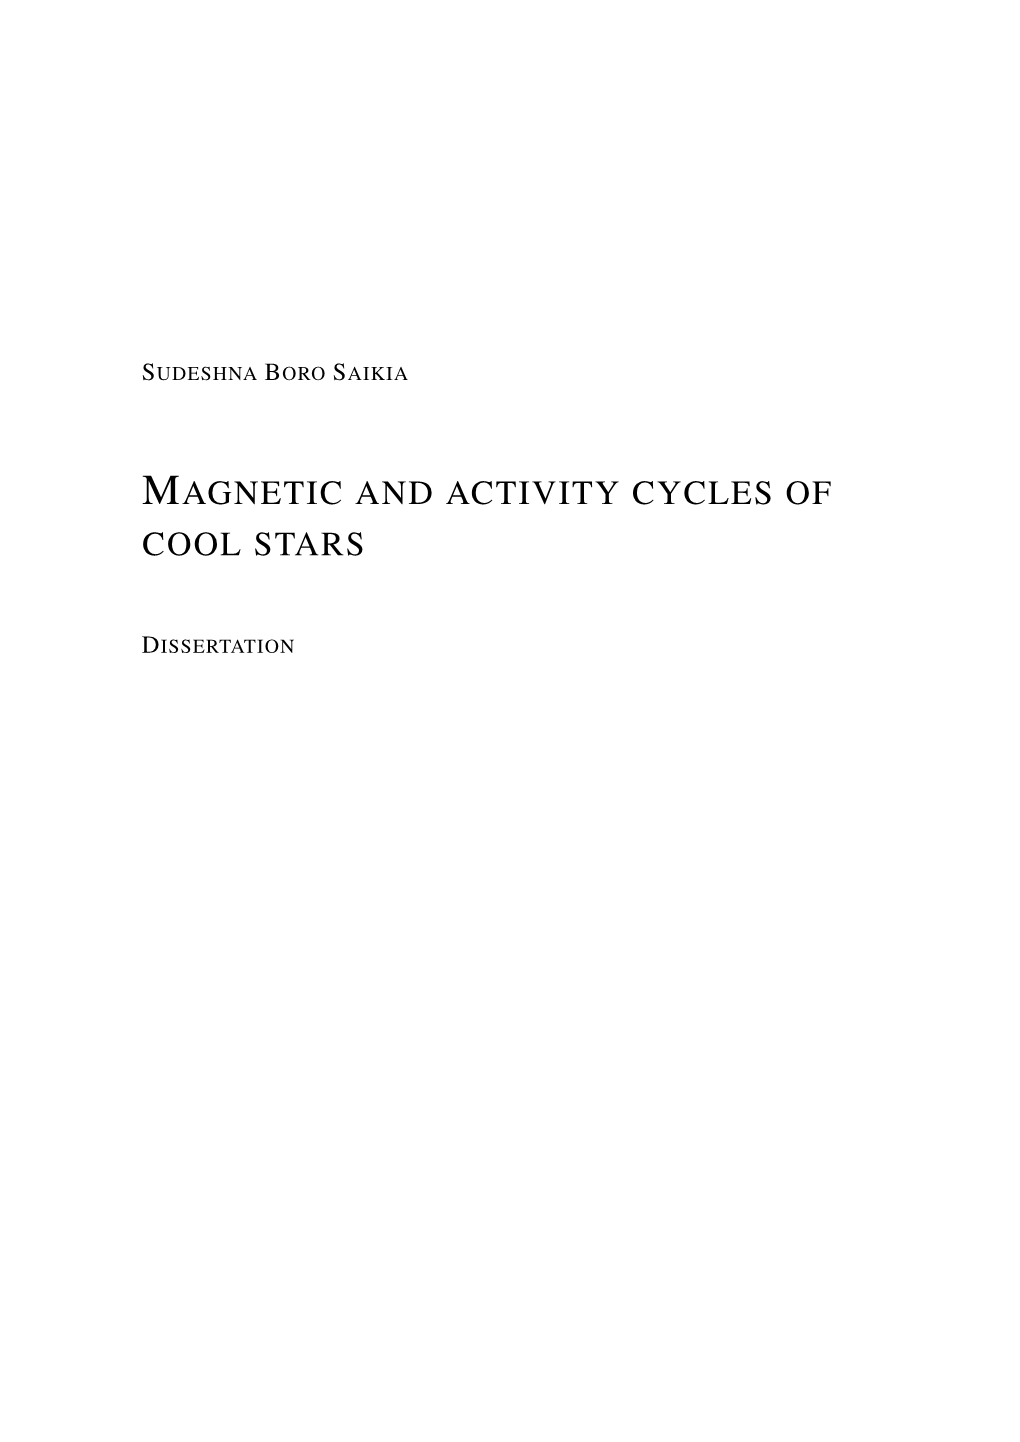 Magnetic and Activity Cycles of Cool Stars